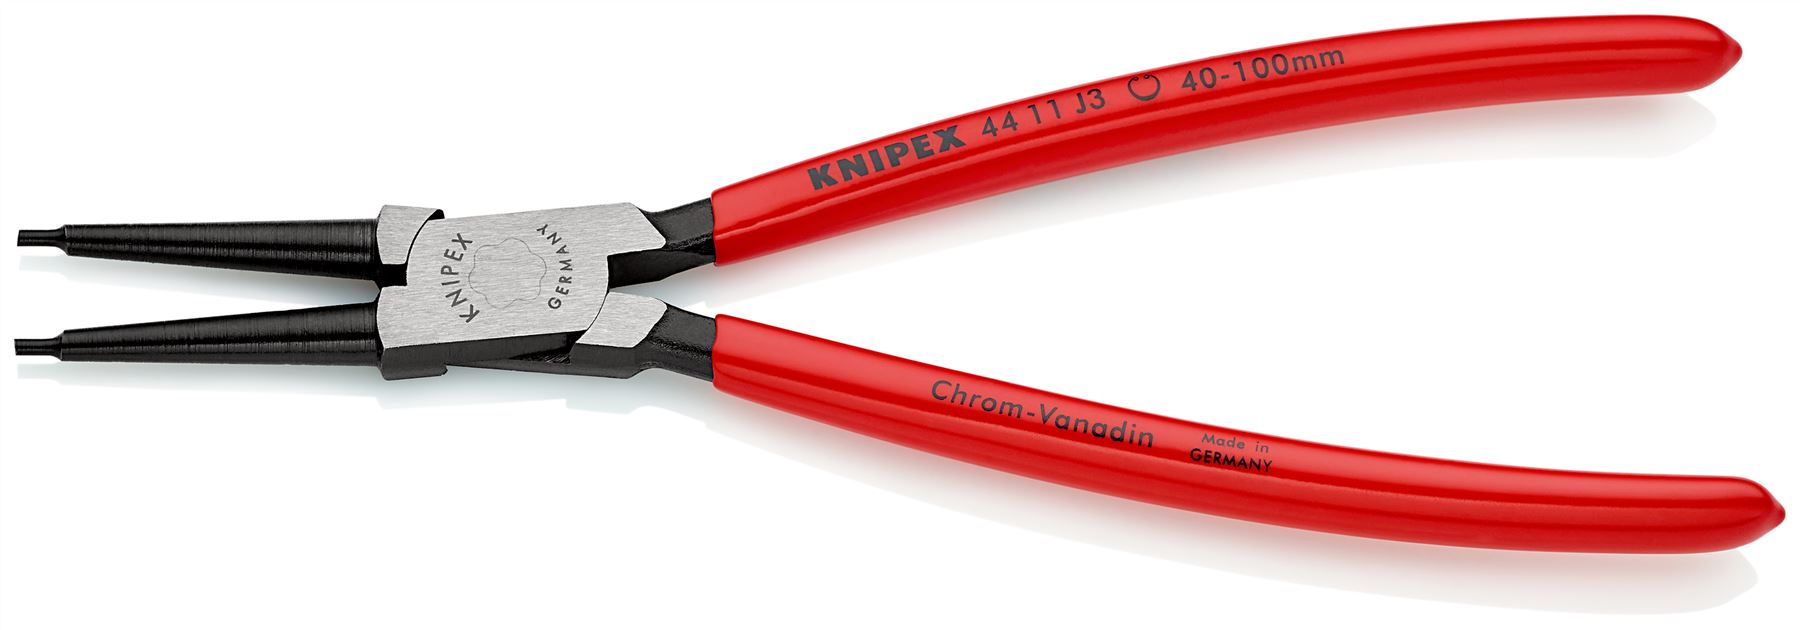 KNIPEX Circlip Pliers for Internal Circlips in Bore Holes 225mm 2.3mm Diameter Tips 44 11 J3